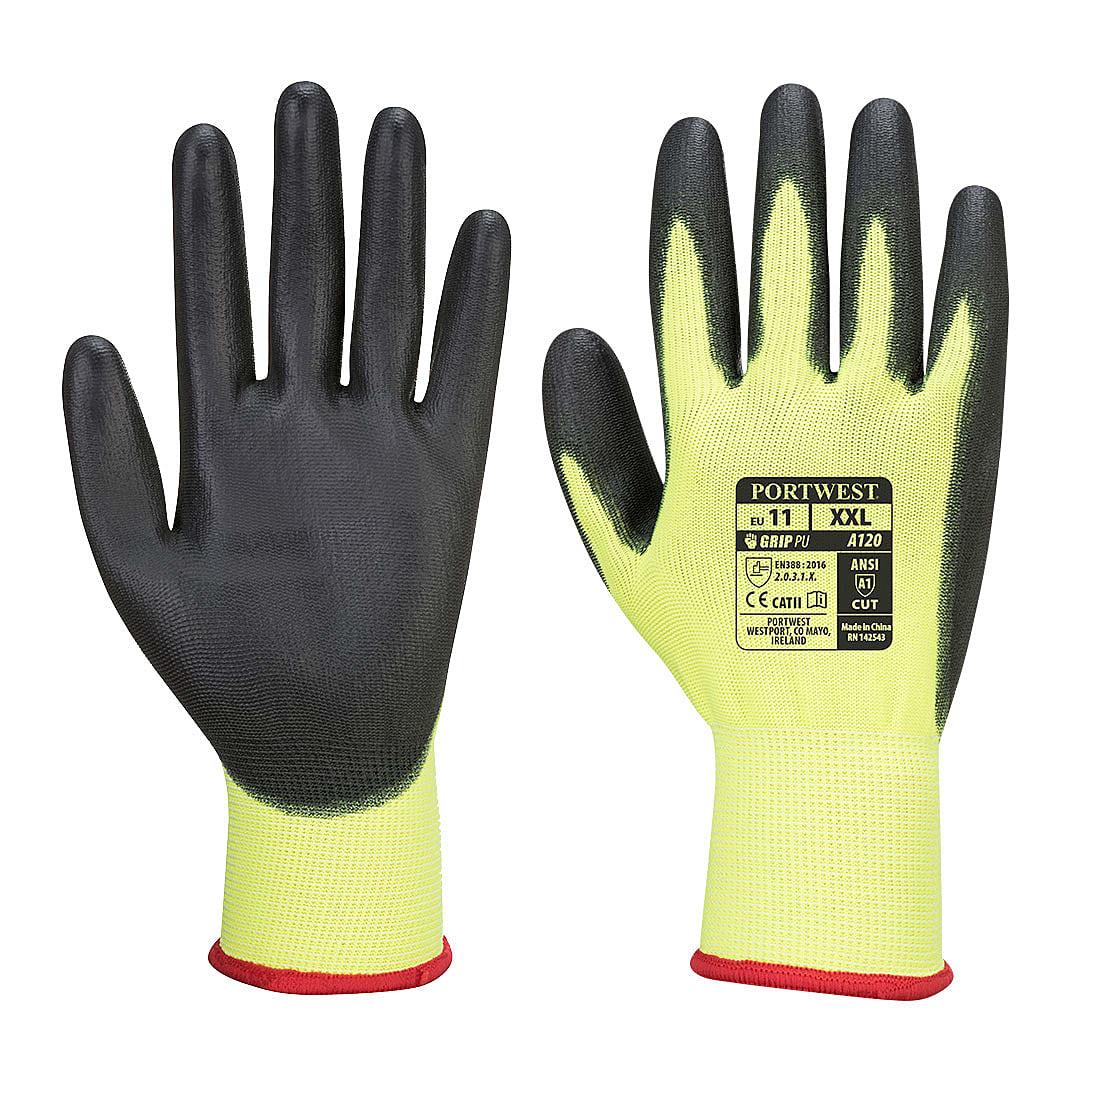 Portwest PU Palm Gloves in Yellow / Black (Product Code: A120)